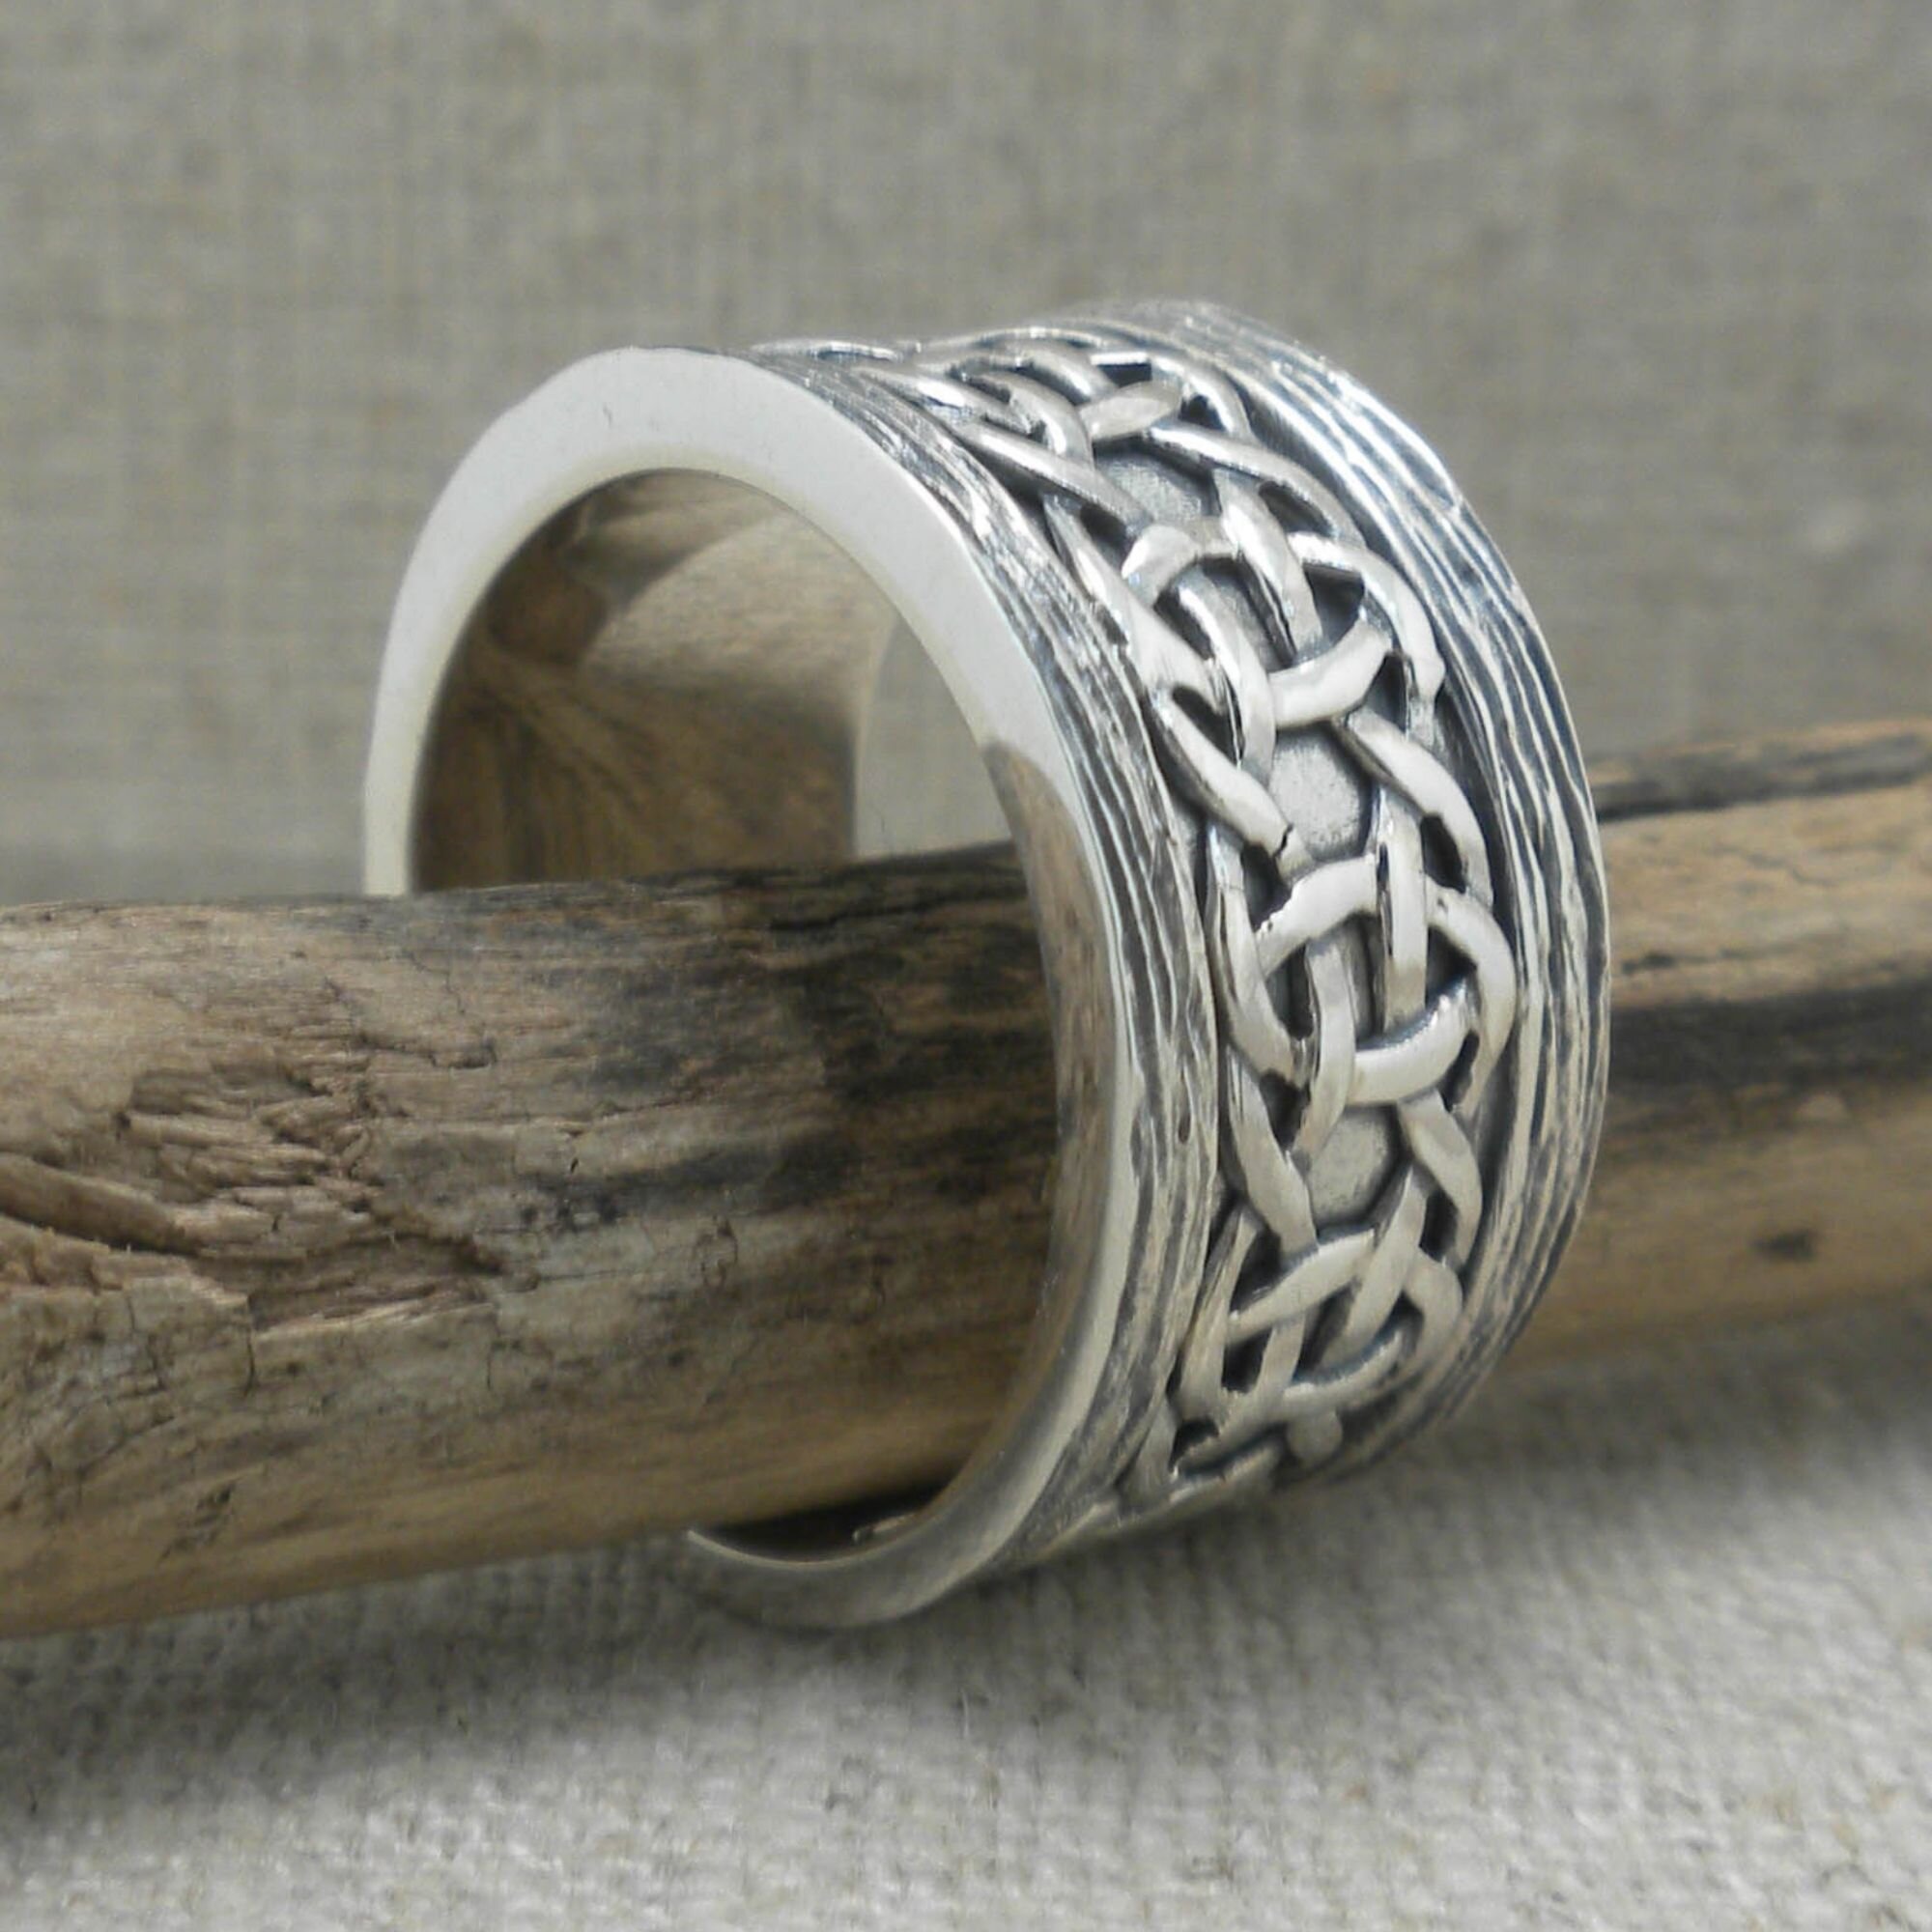 Scavaig Ring by Keith Jack